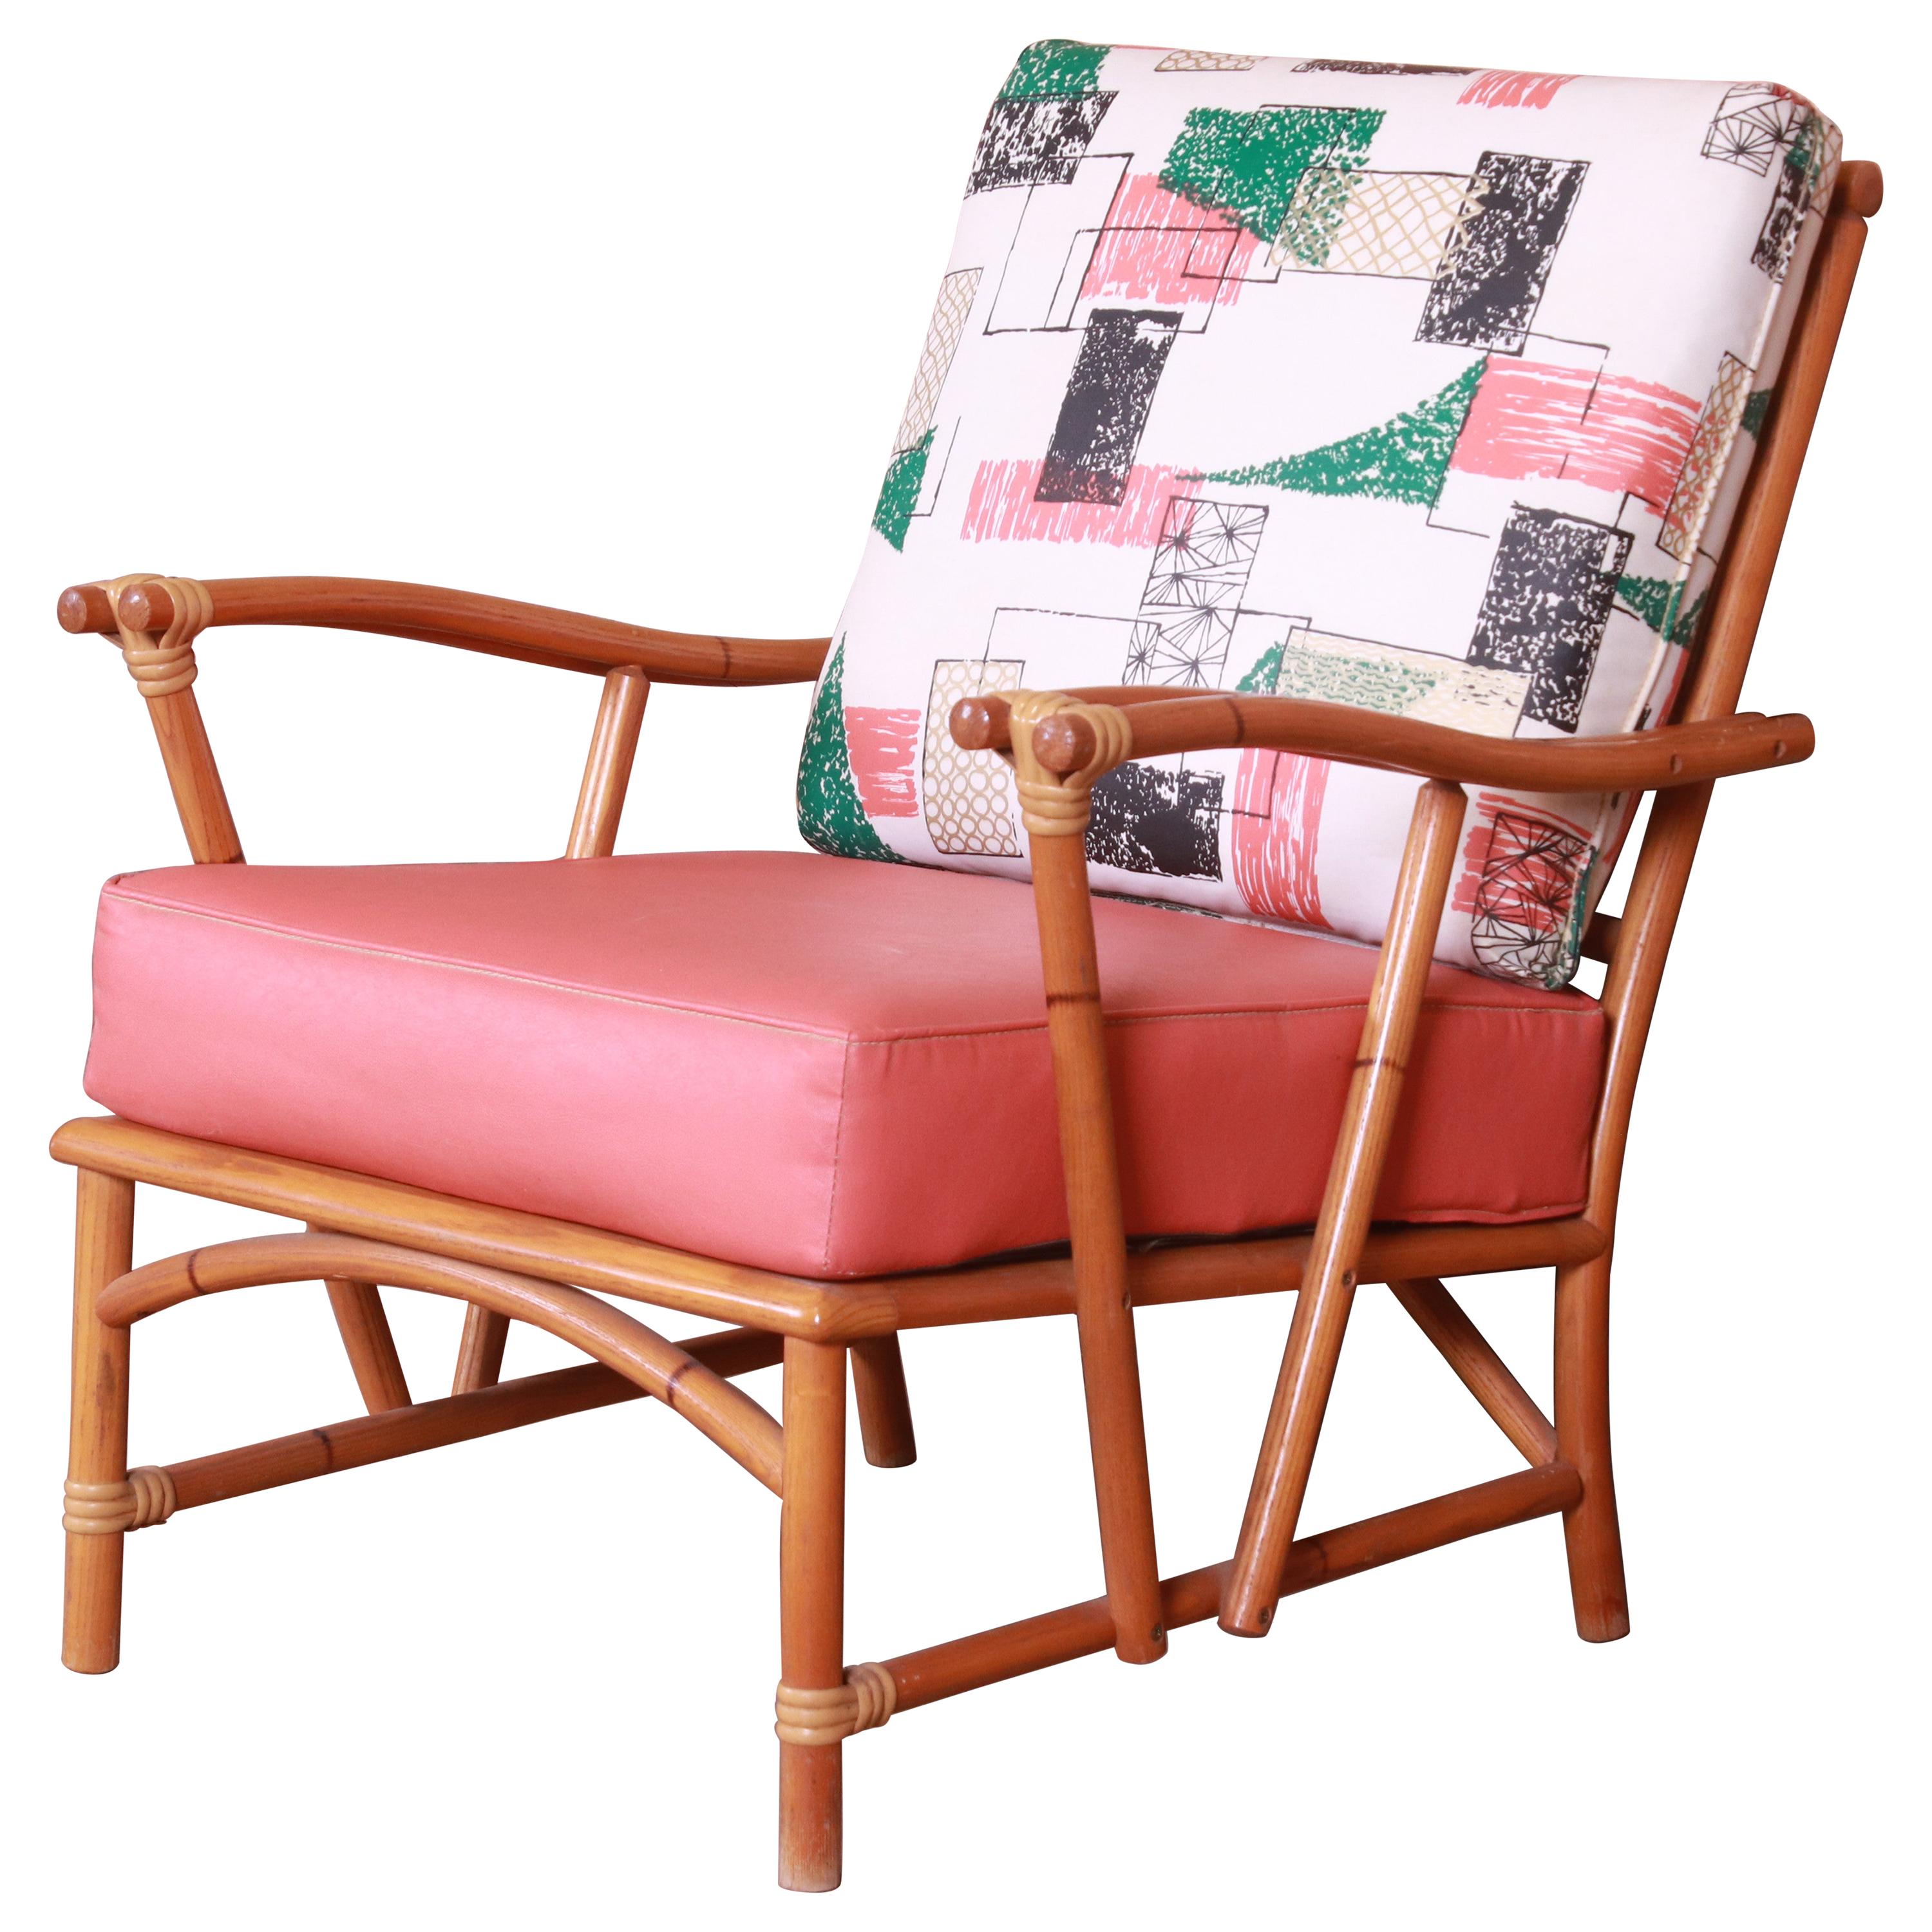 Heywood Wakefield Ashcraft Hollywood Regency Bamboo Form Lounge Chair, 1950s